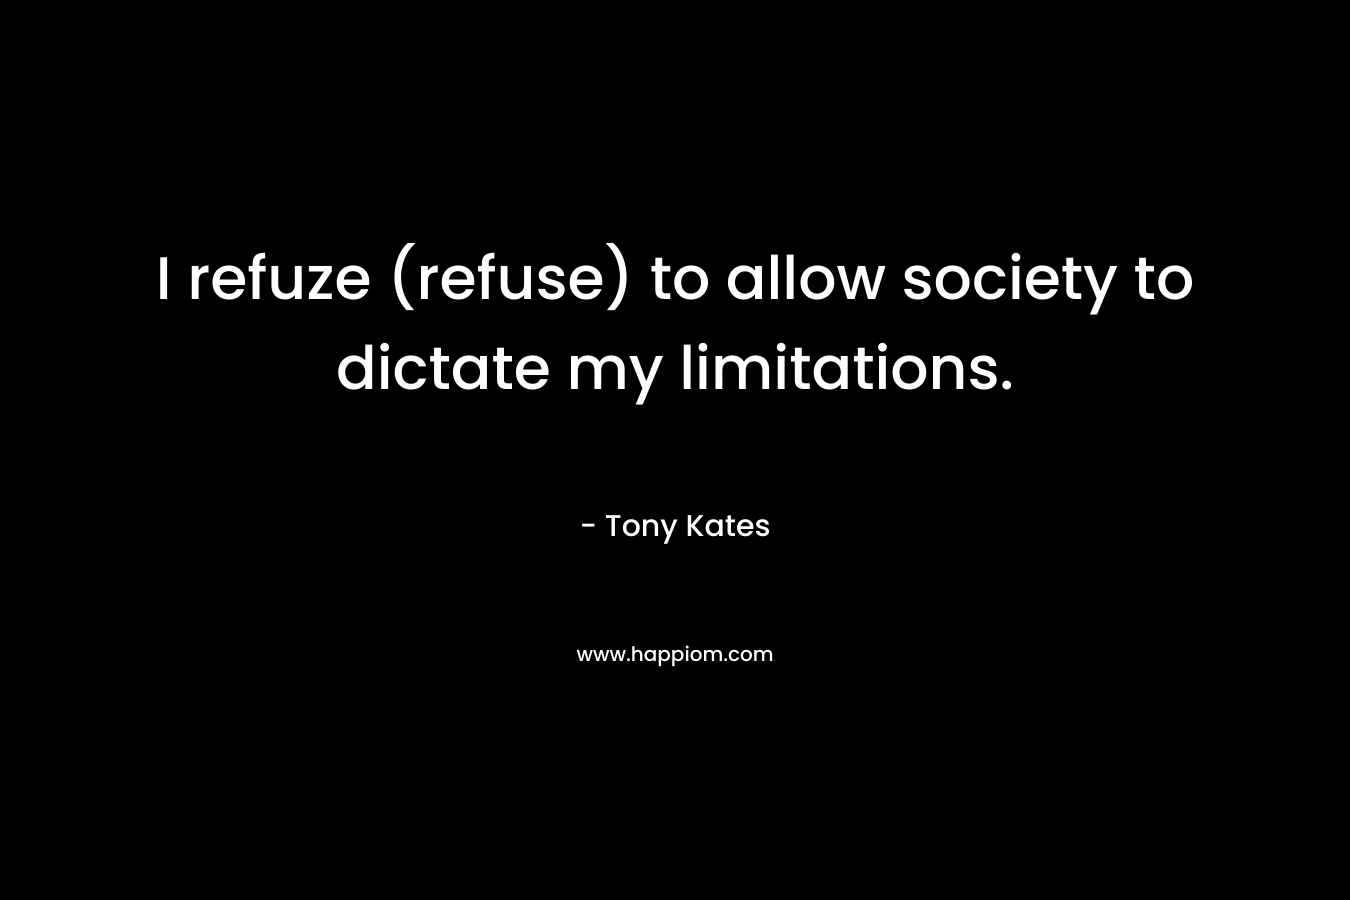 I refuze (refuse) to allow society to dictate my limitations.